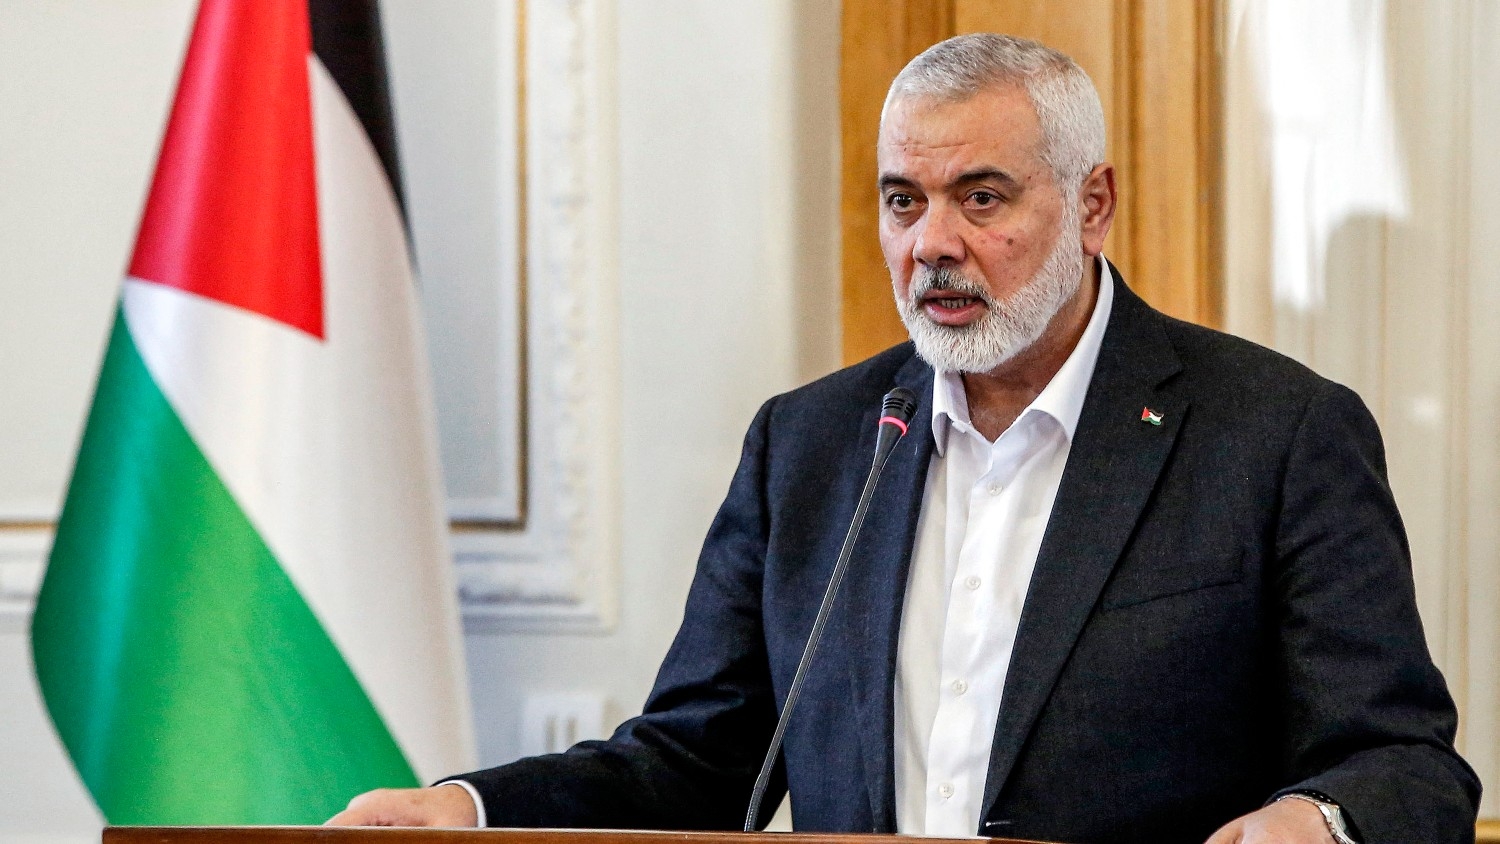 In response to ICC warrants, US says Hamas should be killed or prosecuted by Israel